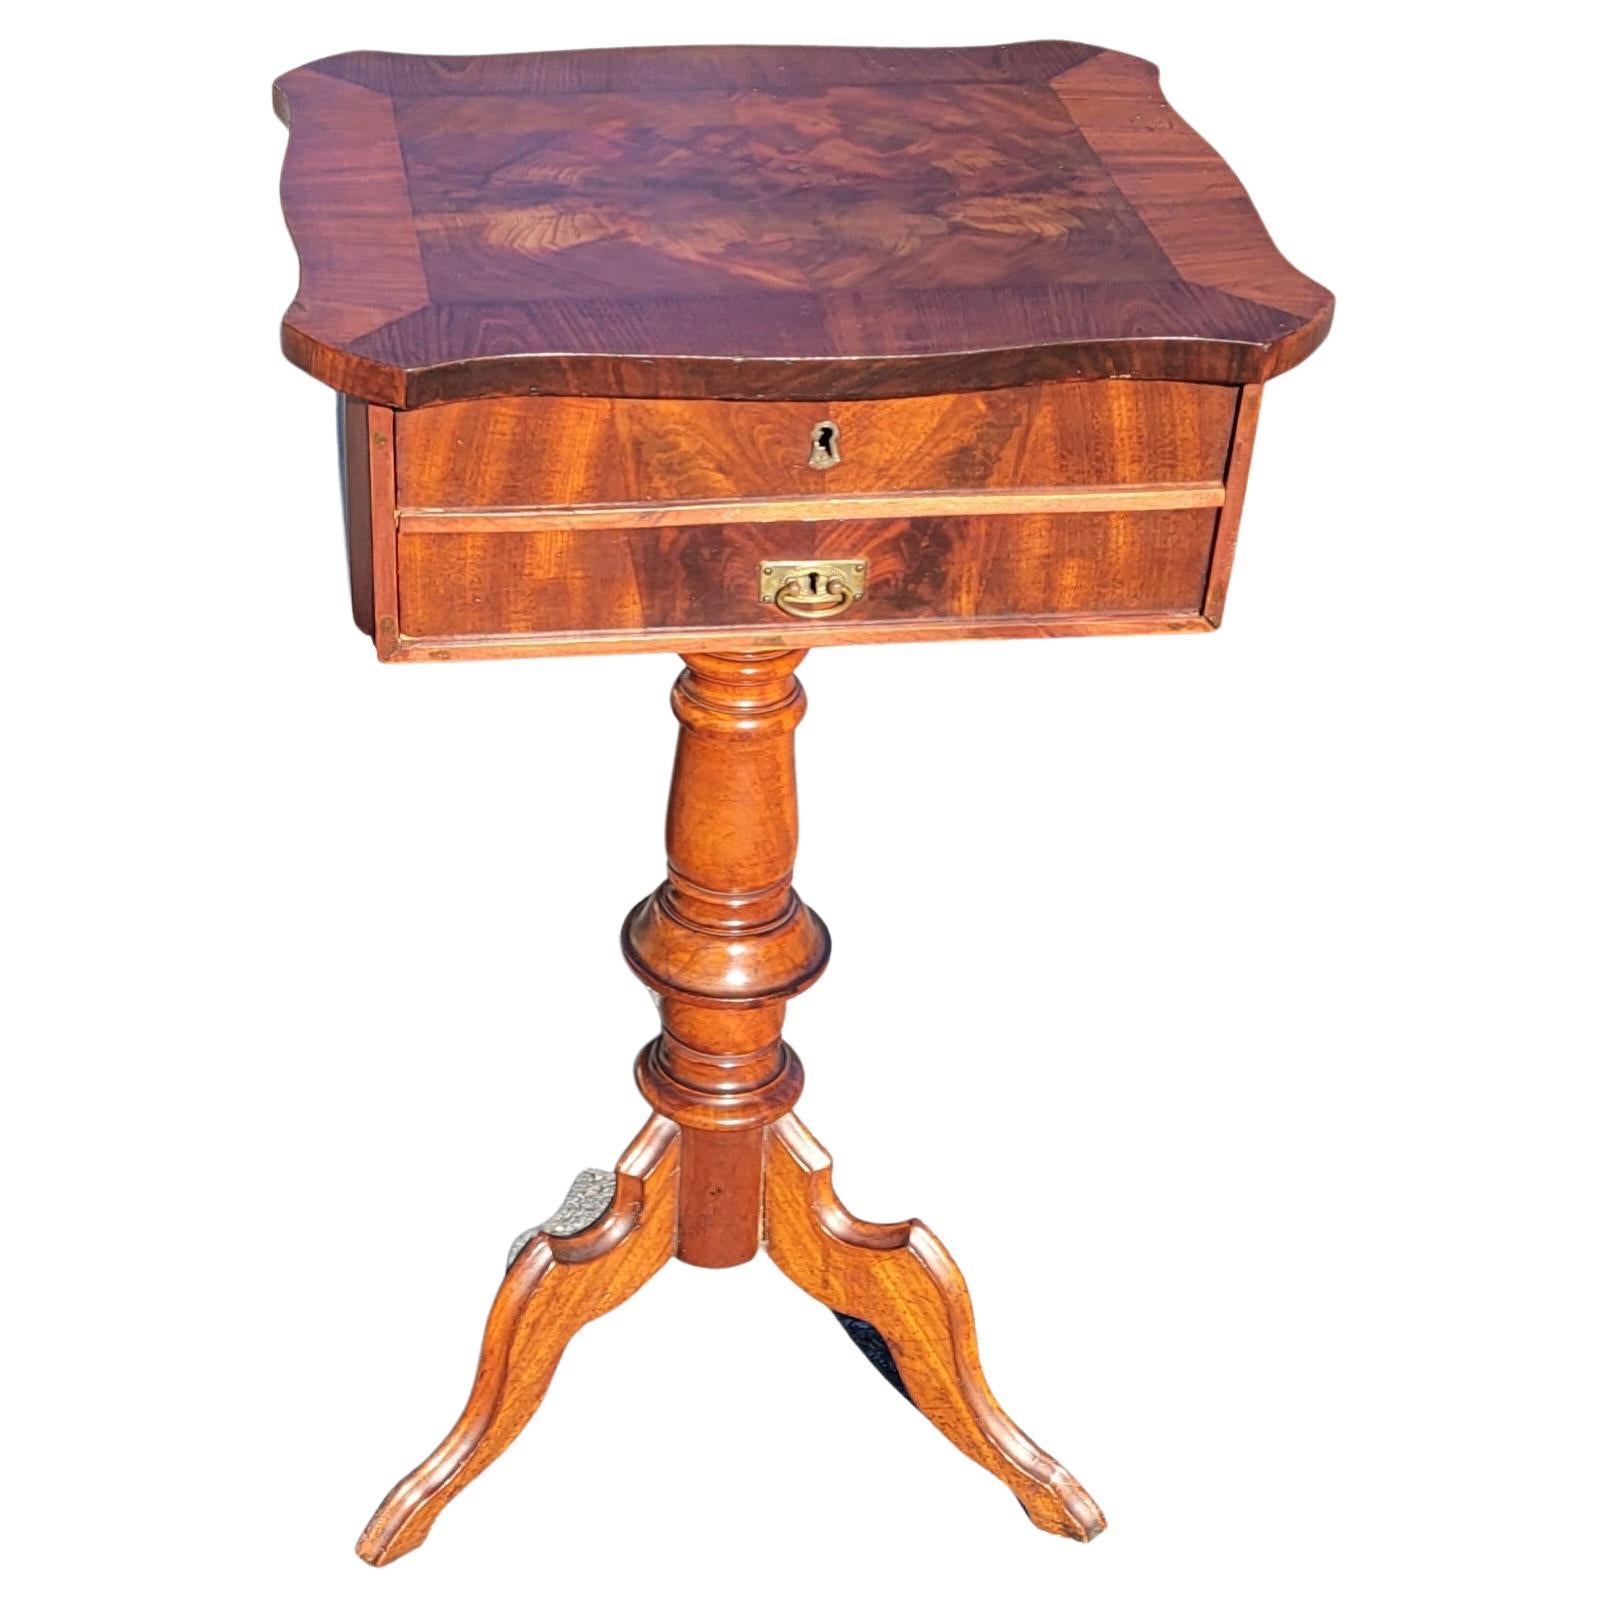 A Biedermeier era Flame Mahogany pedestal 2-drawer sewing table or side table. 
A Delicate Louis Philippe side table or sewing table out of Germany from the late 19th century around 1870. Standing on a beautifully base with three artfully processed